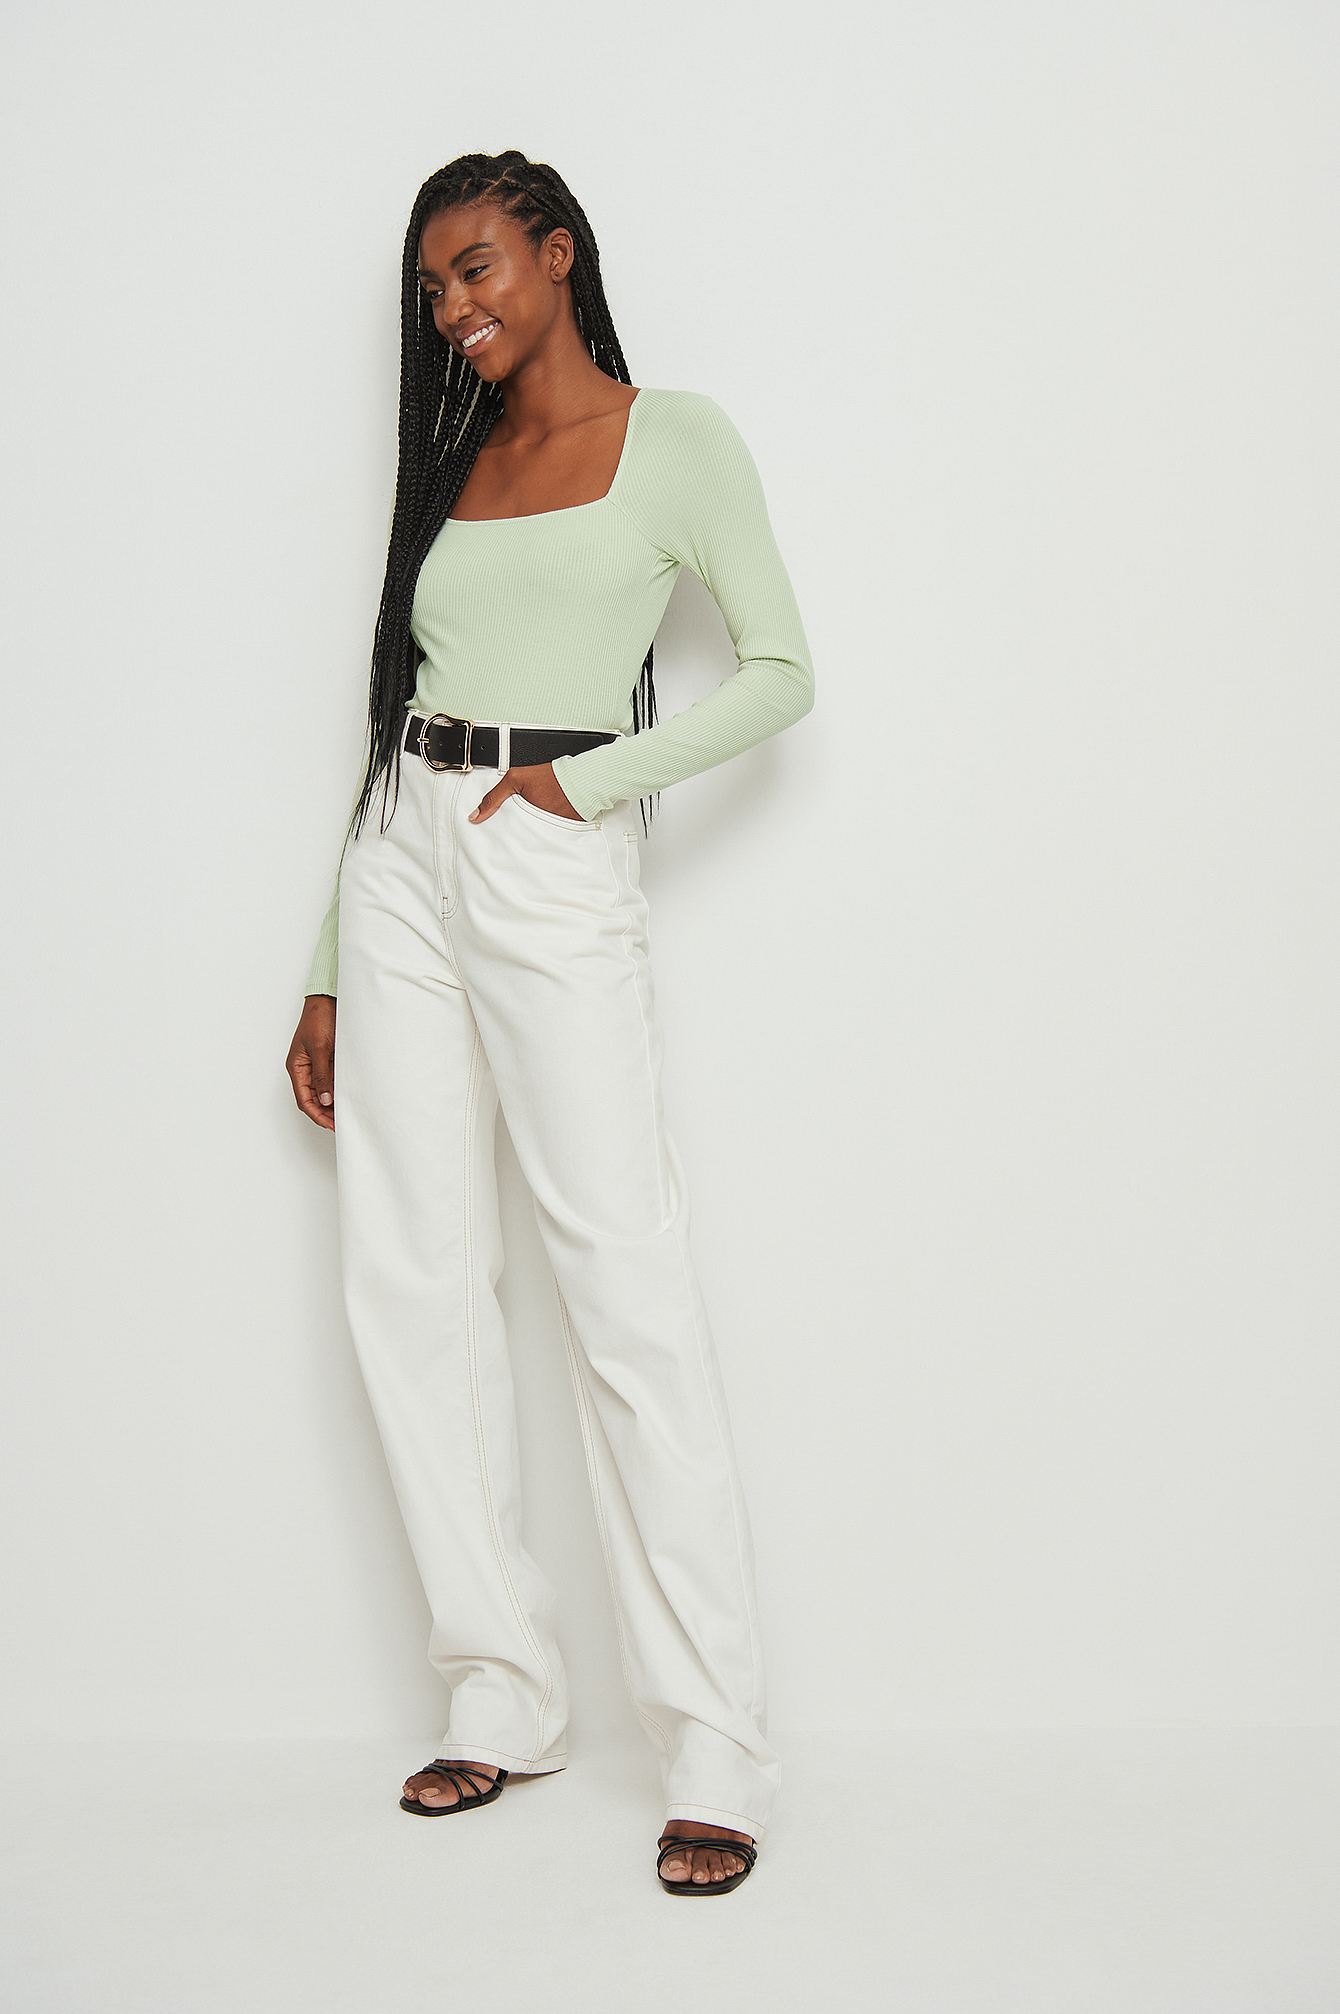 Ribbed Square Neck Detail Top Outfit